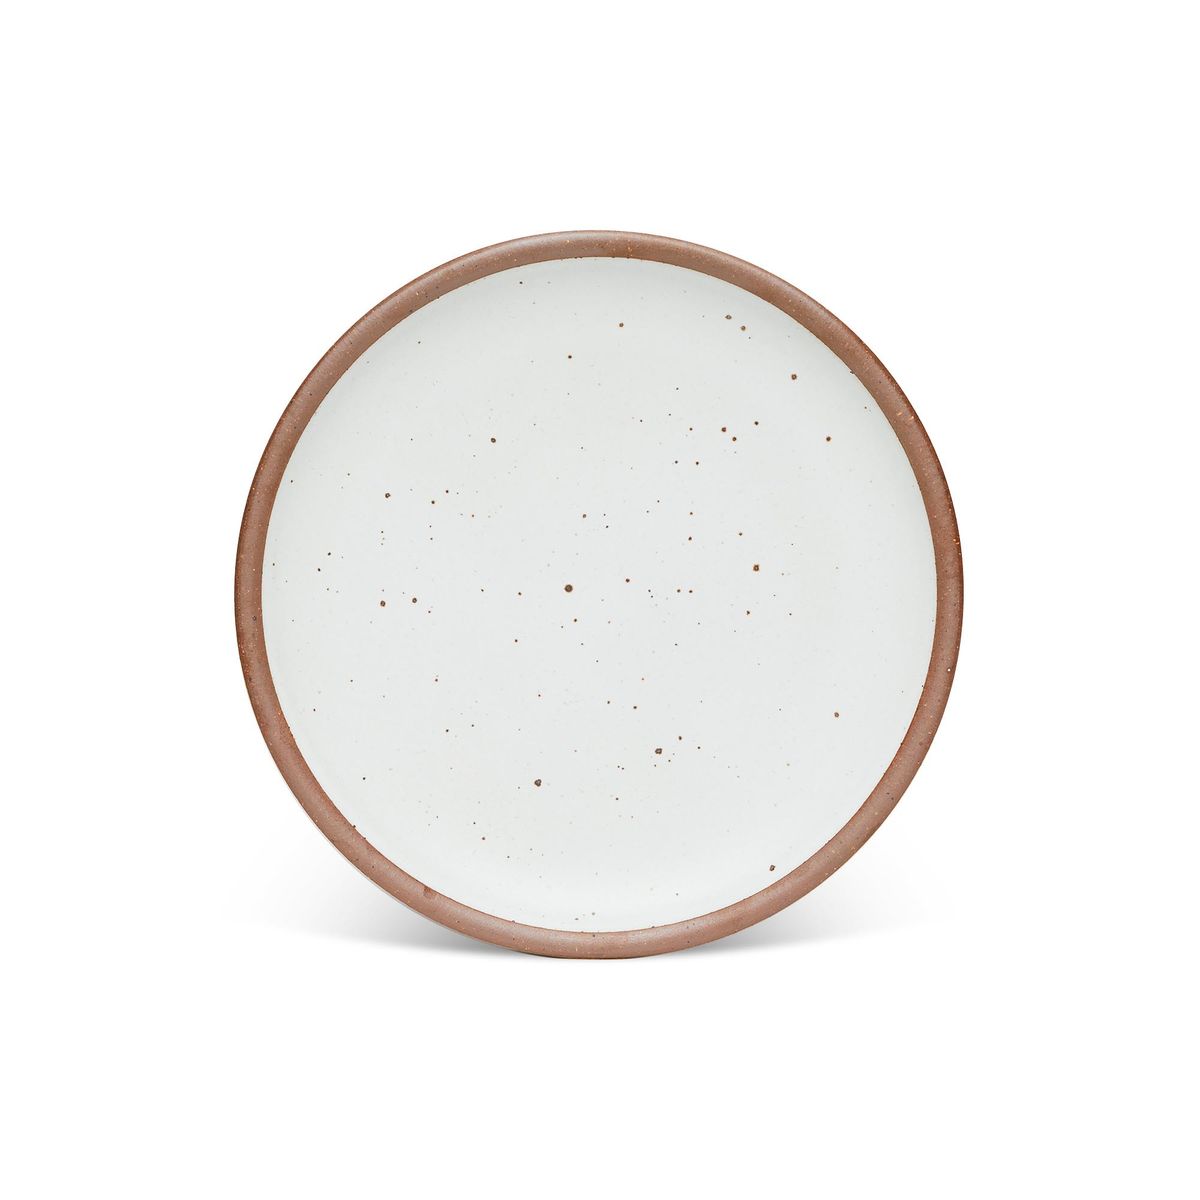 A dinner sized ceramic plate in a cool white color featuring iron speckles and an unglazed rim